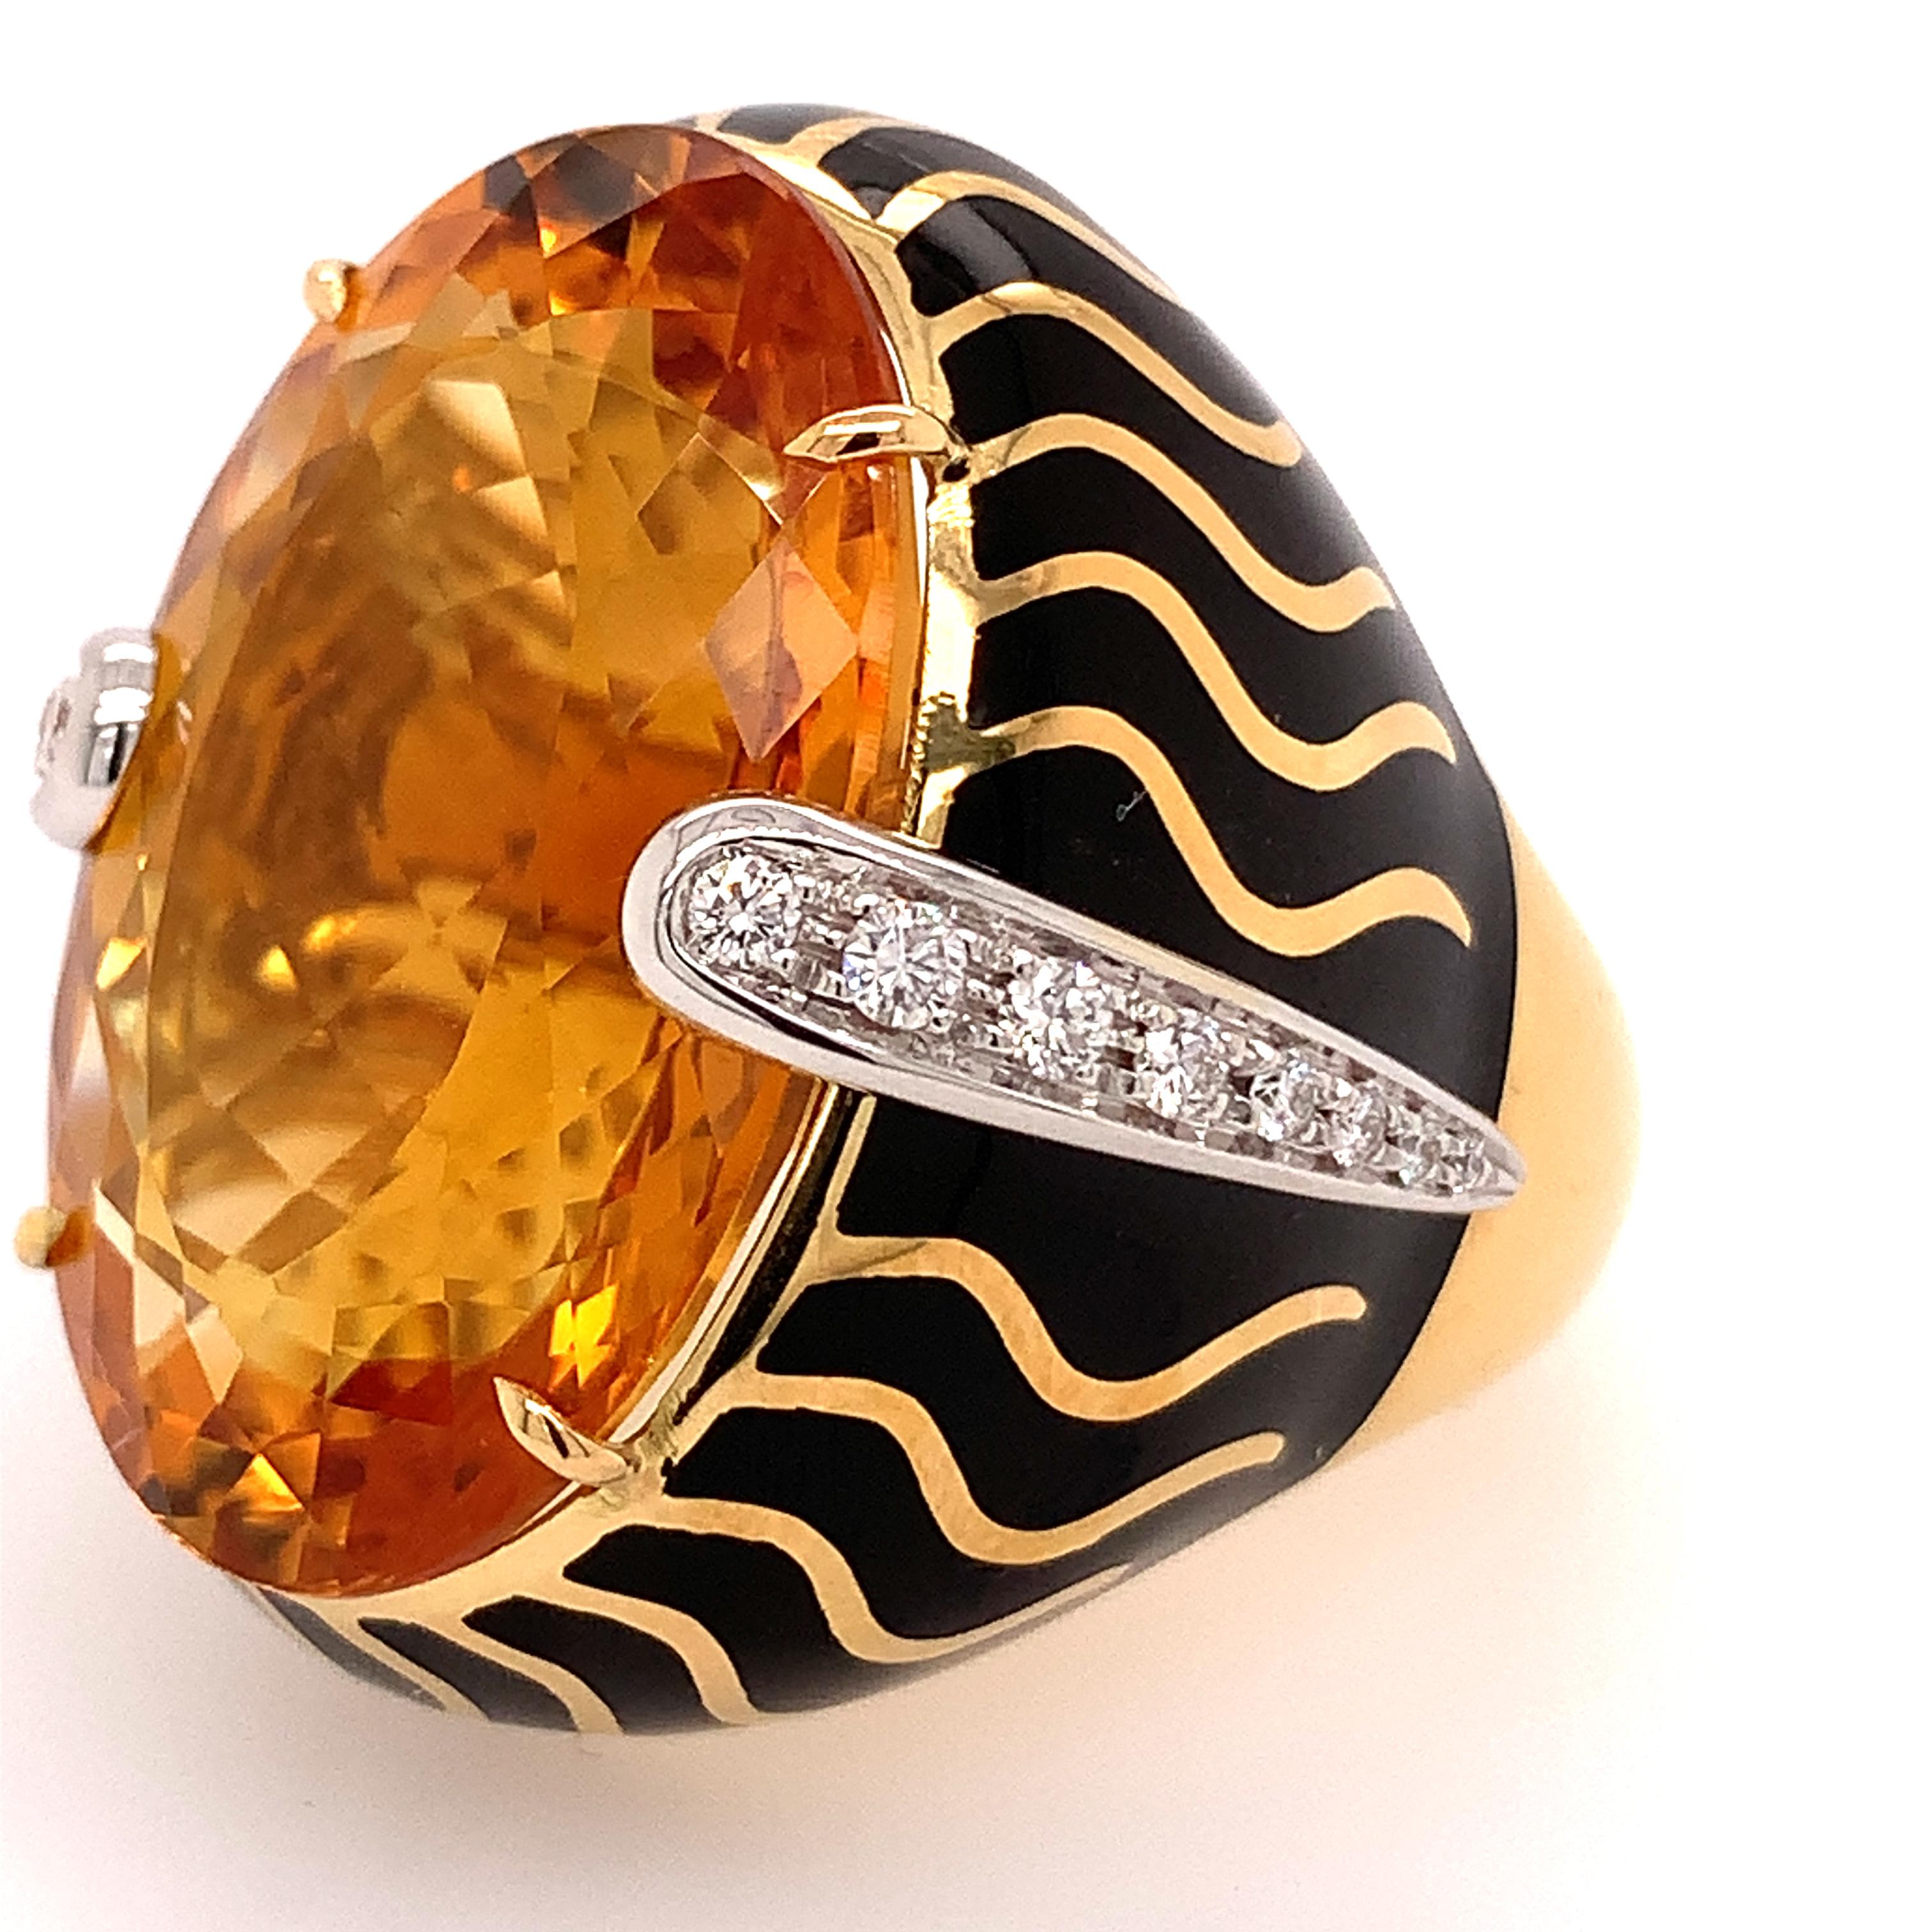 Modern 18kt Gold One of a Kind Ring with 29.15 Ct Citrine and Diamonds, Animalier Look